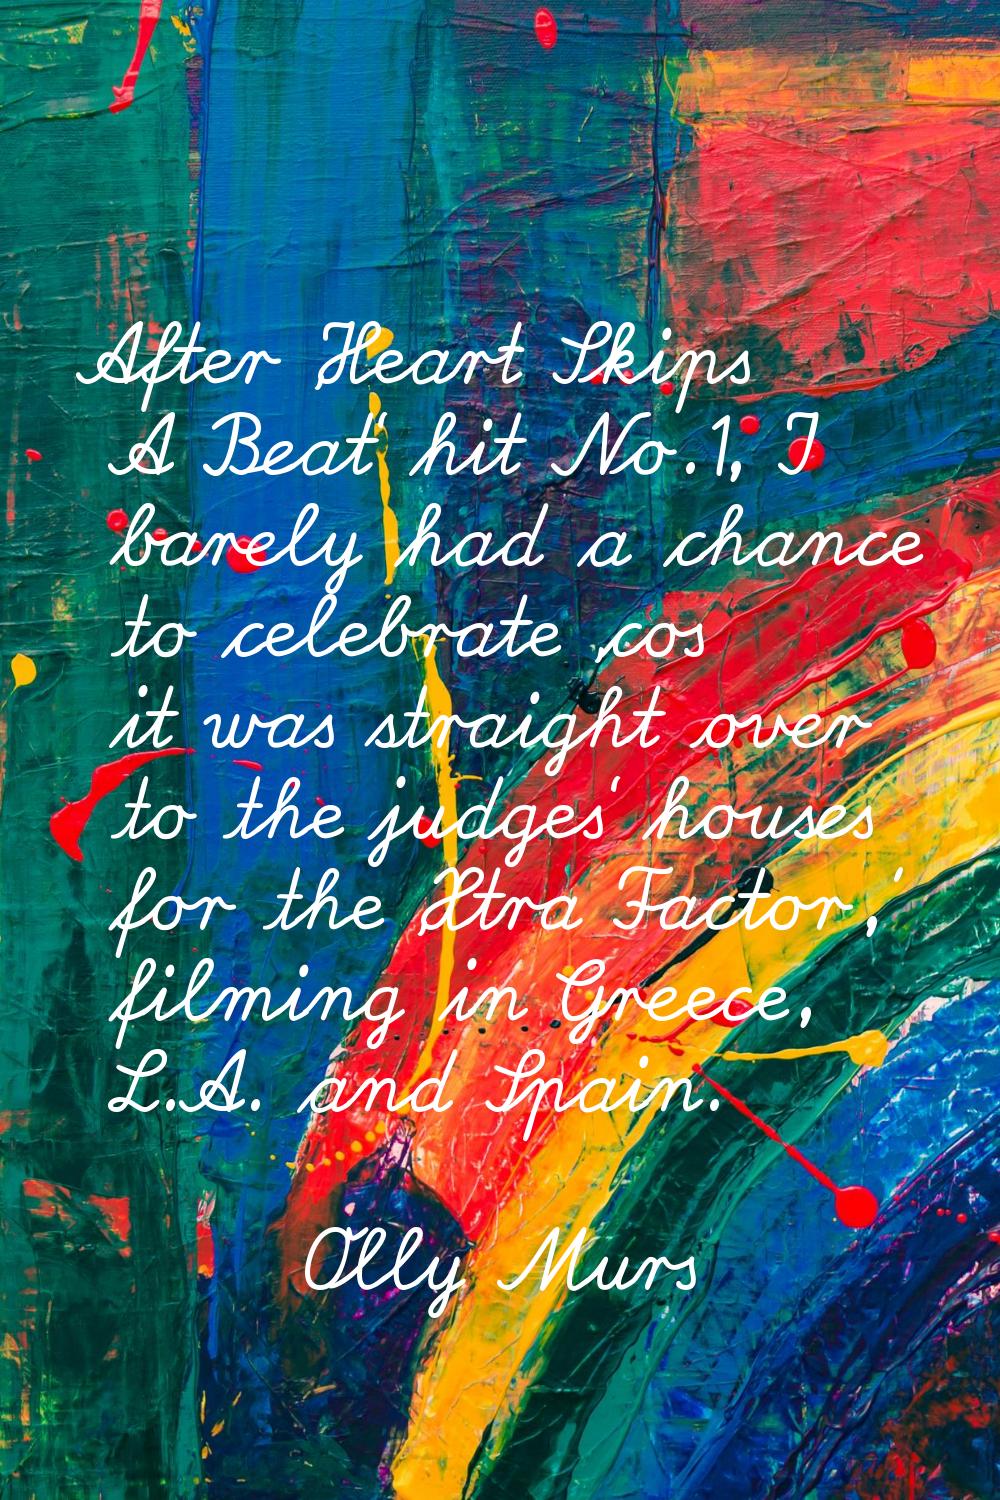 After 'Heart Skips A Beat' hit No.1, I barely had a chance to celebrate 'cos it was straight over t